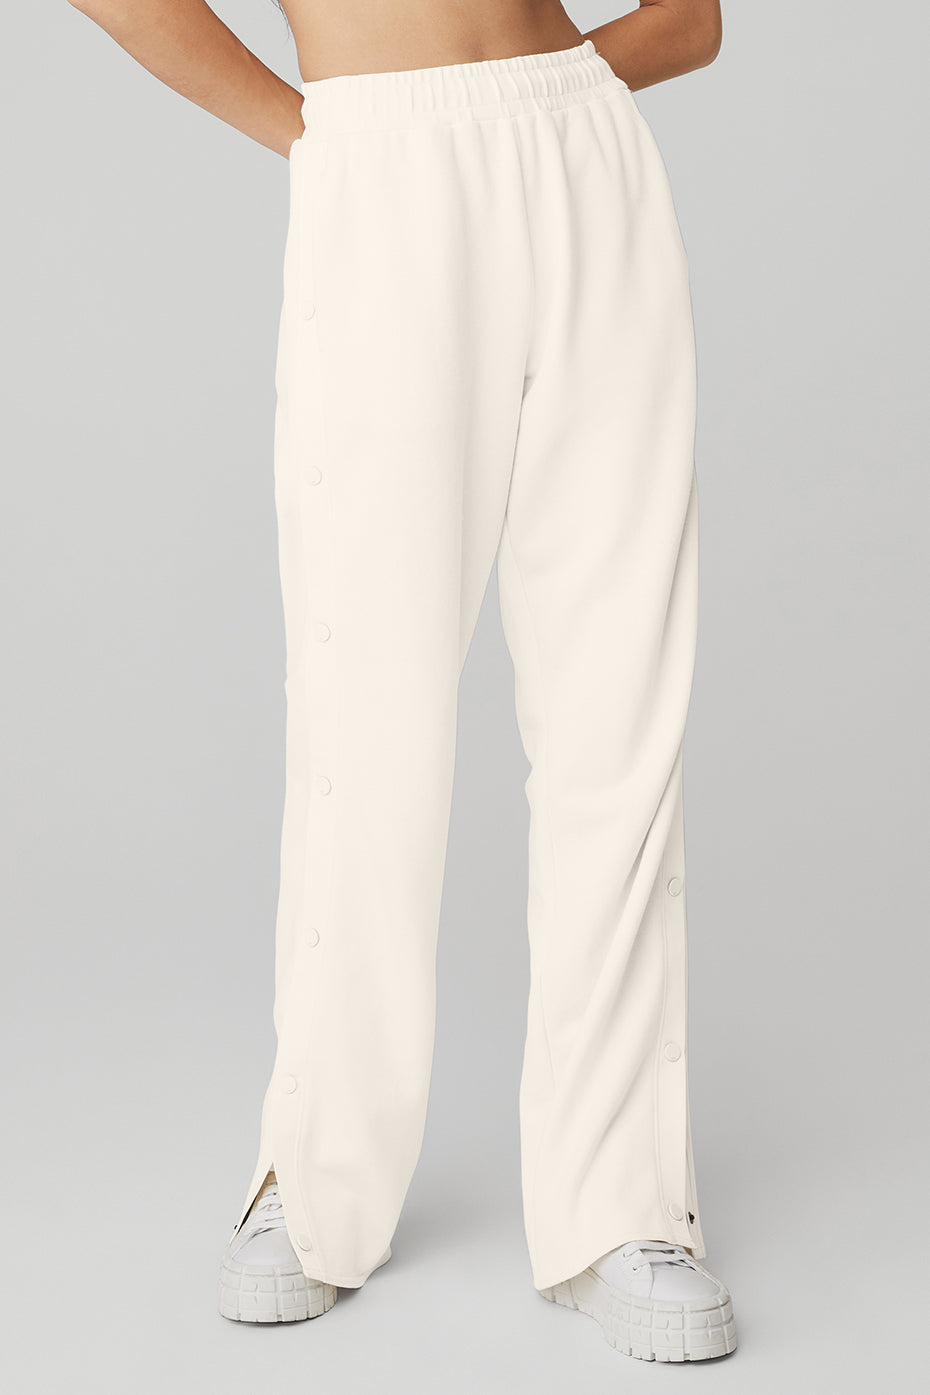 Courtside Tearaway Snap Pants in Ivory by Alo Yoga